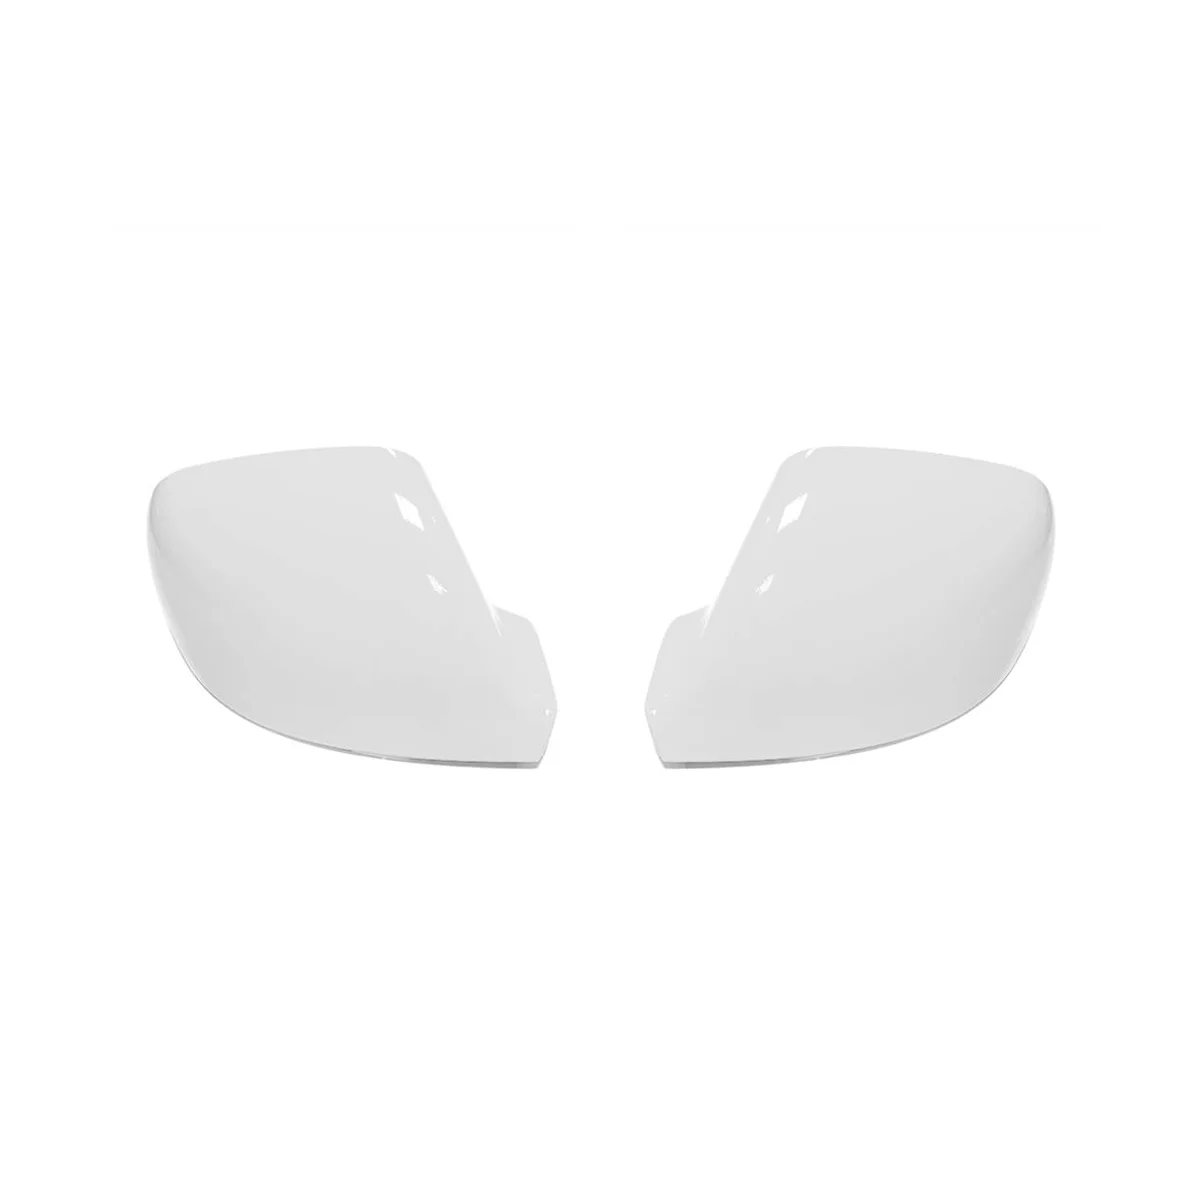 

Car White Side Rearview Mirror Cap Cover Mirror Cover Direct for VW Transporter T5 T5.1 2010-2015 T6 2016-2019